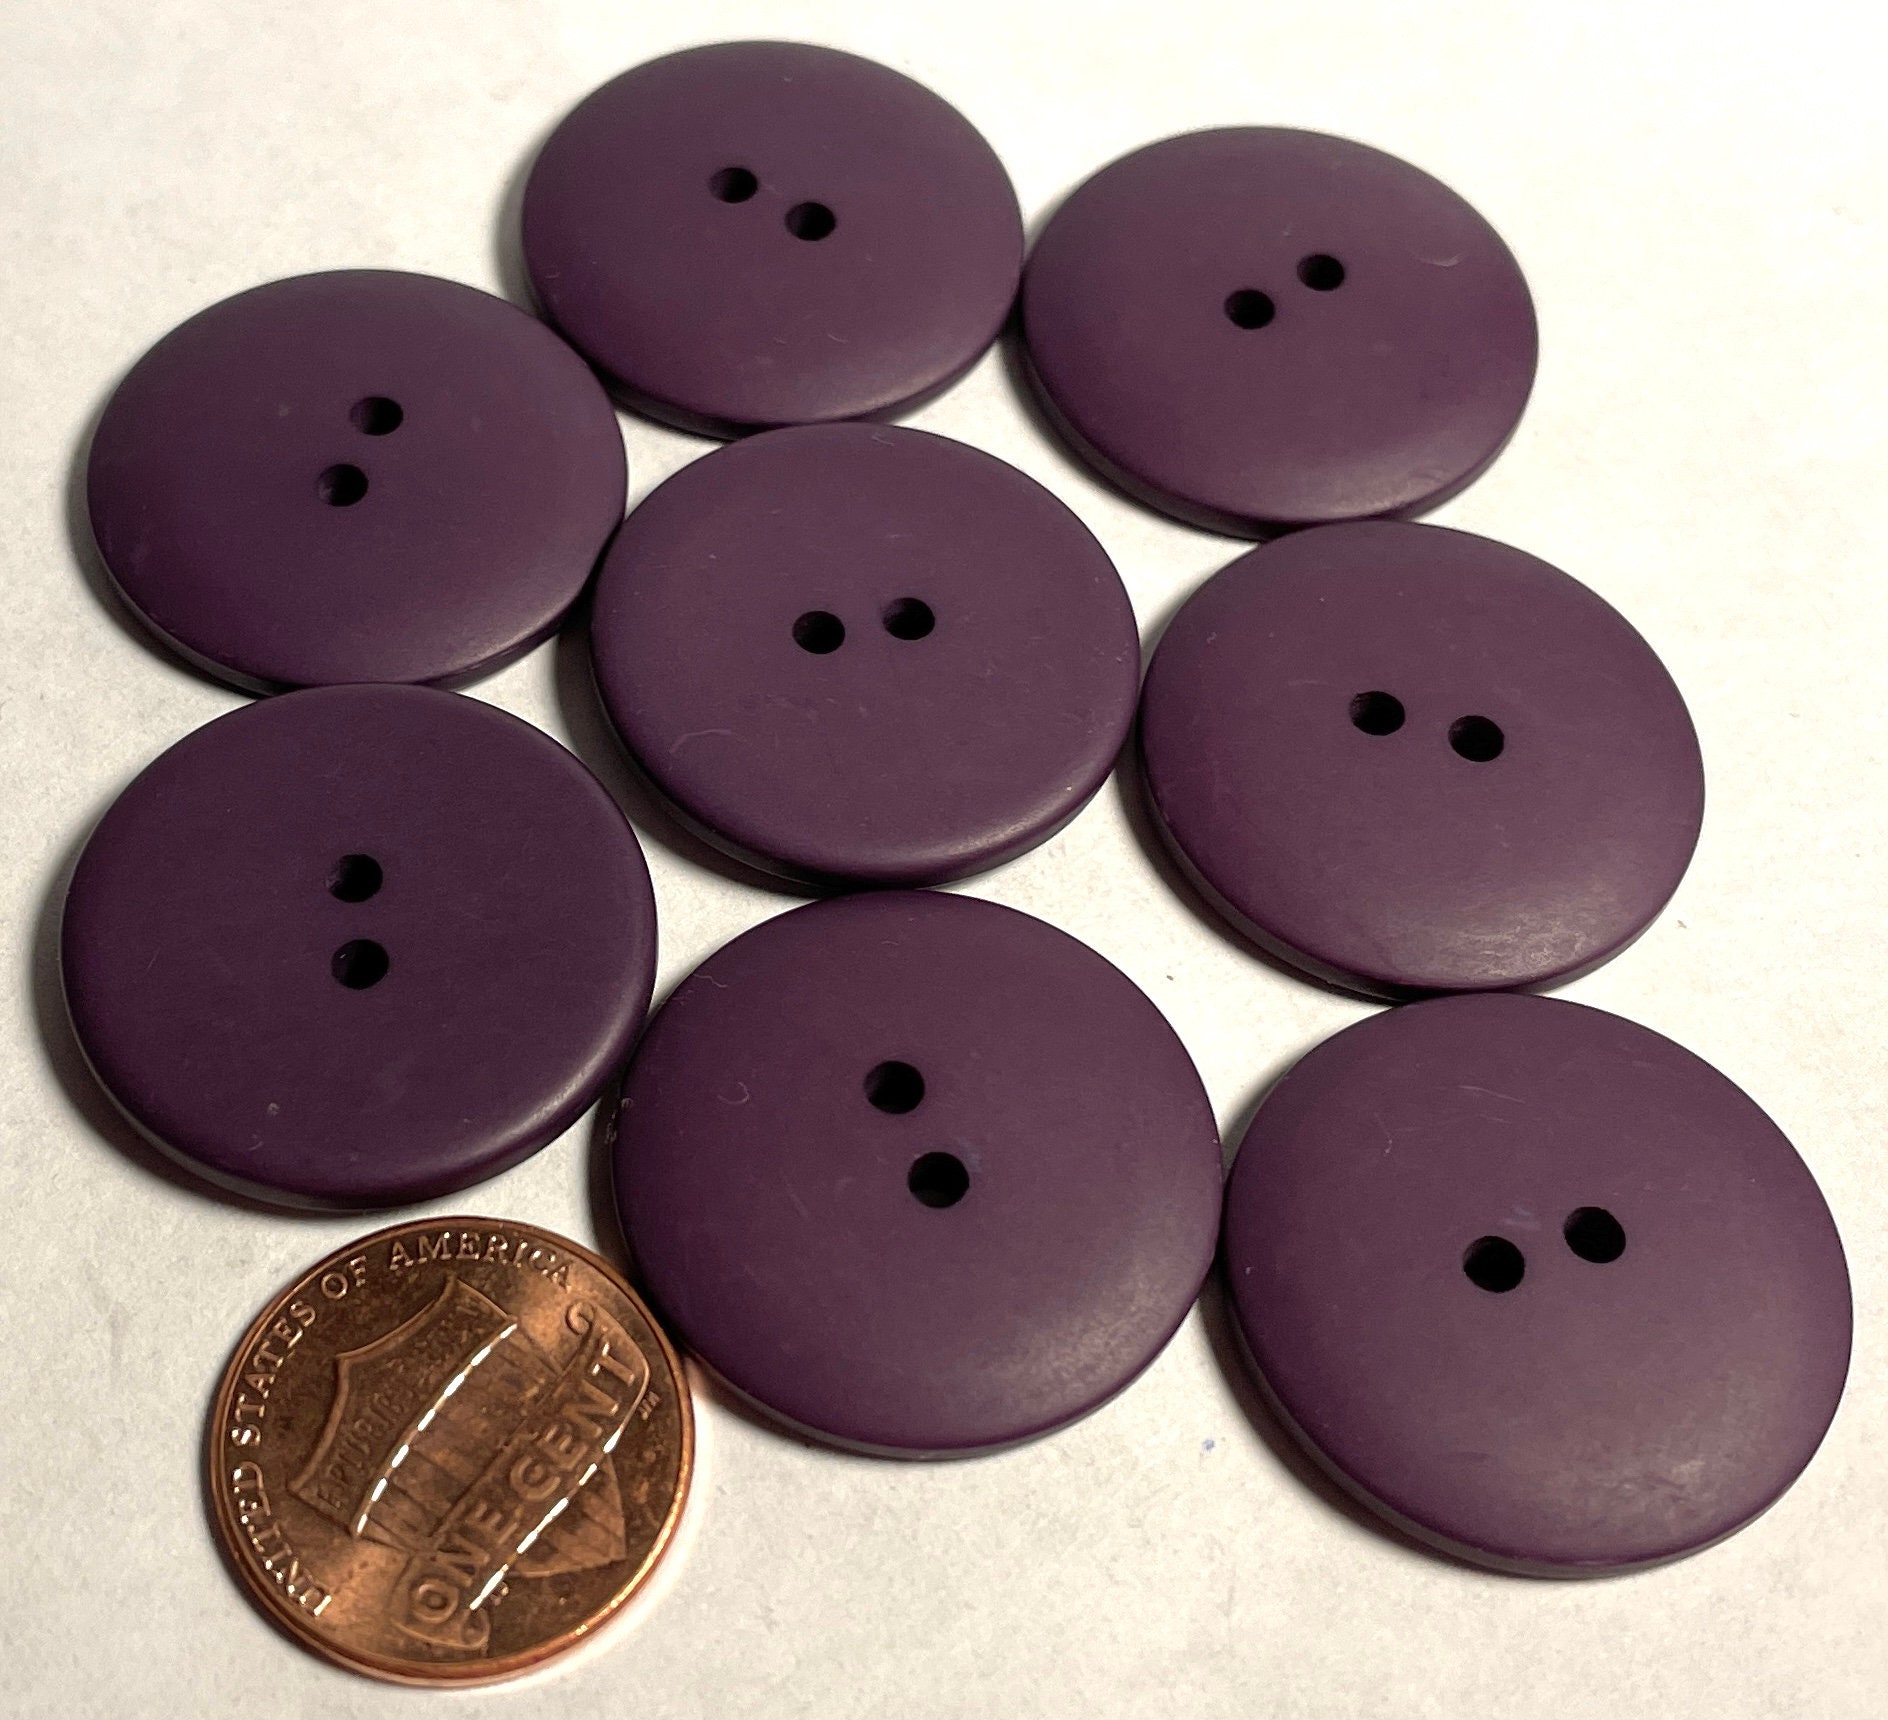  Greentime 1400-1500 Pcs Purple Buttons for Crafts